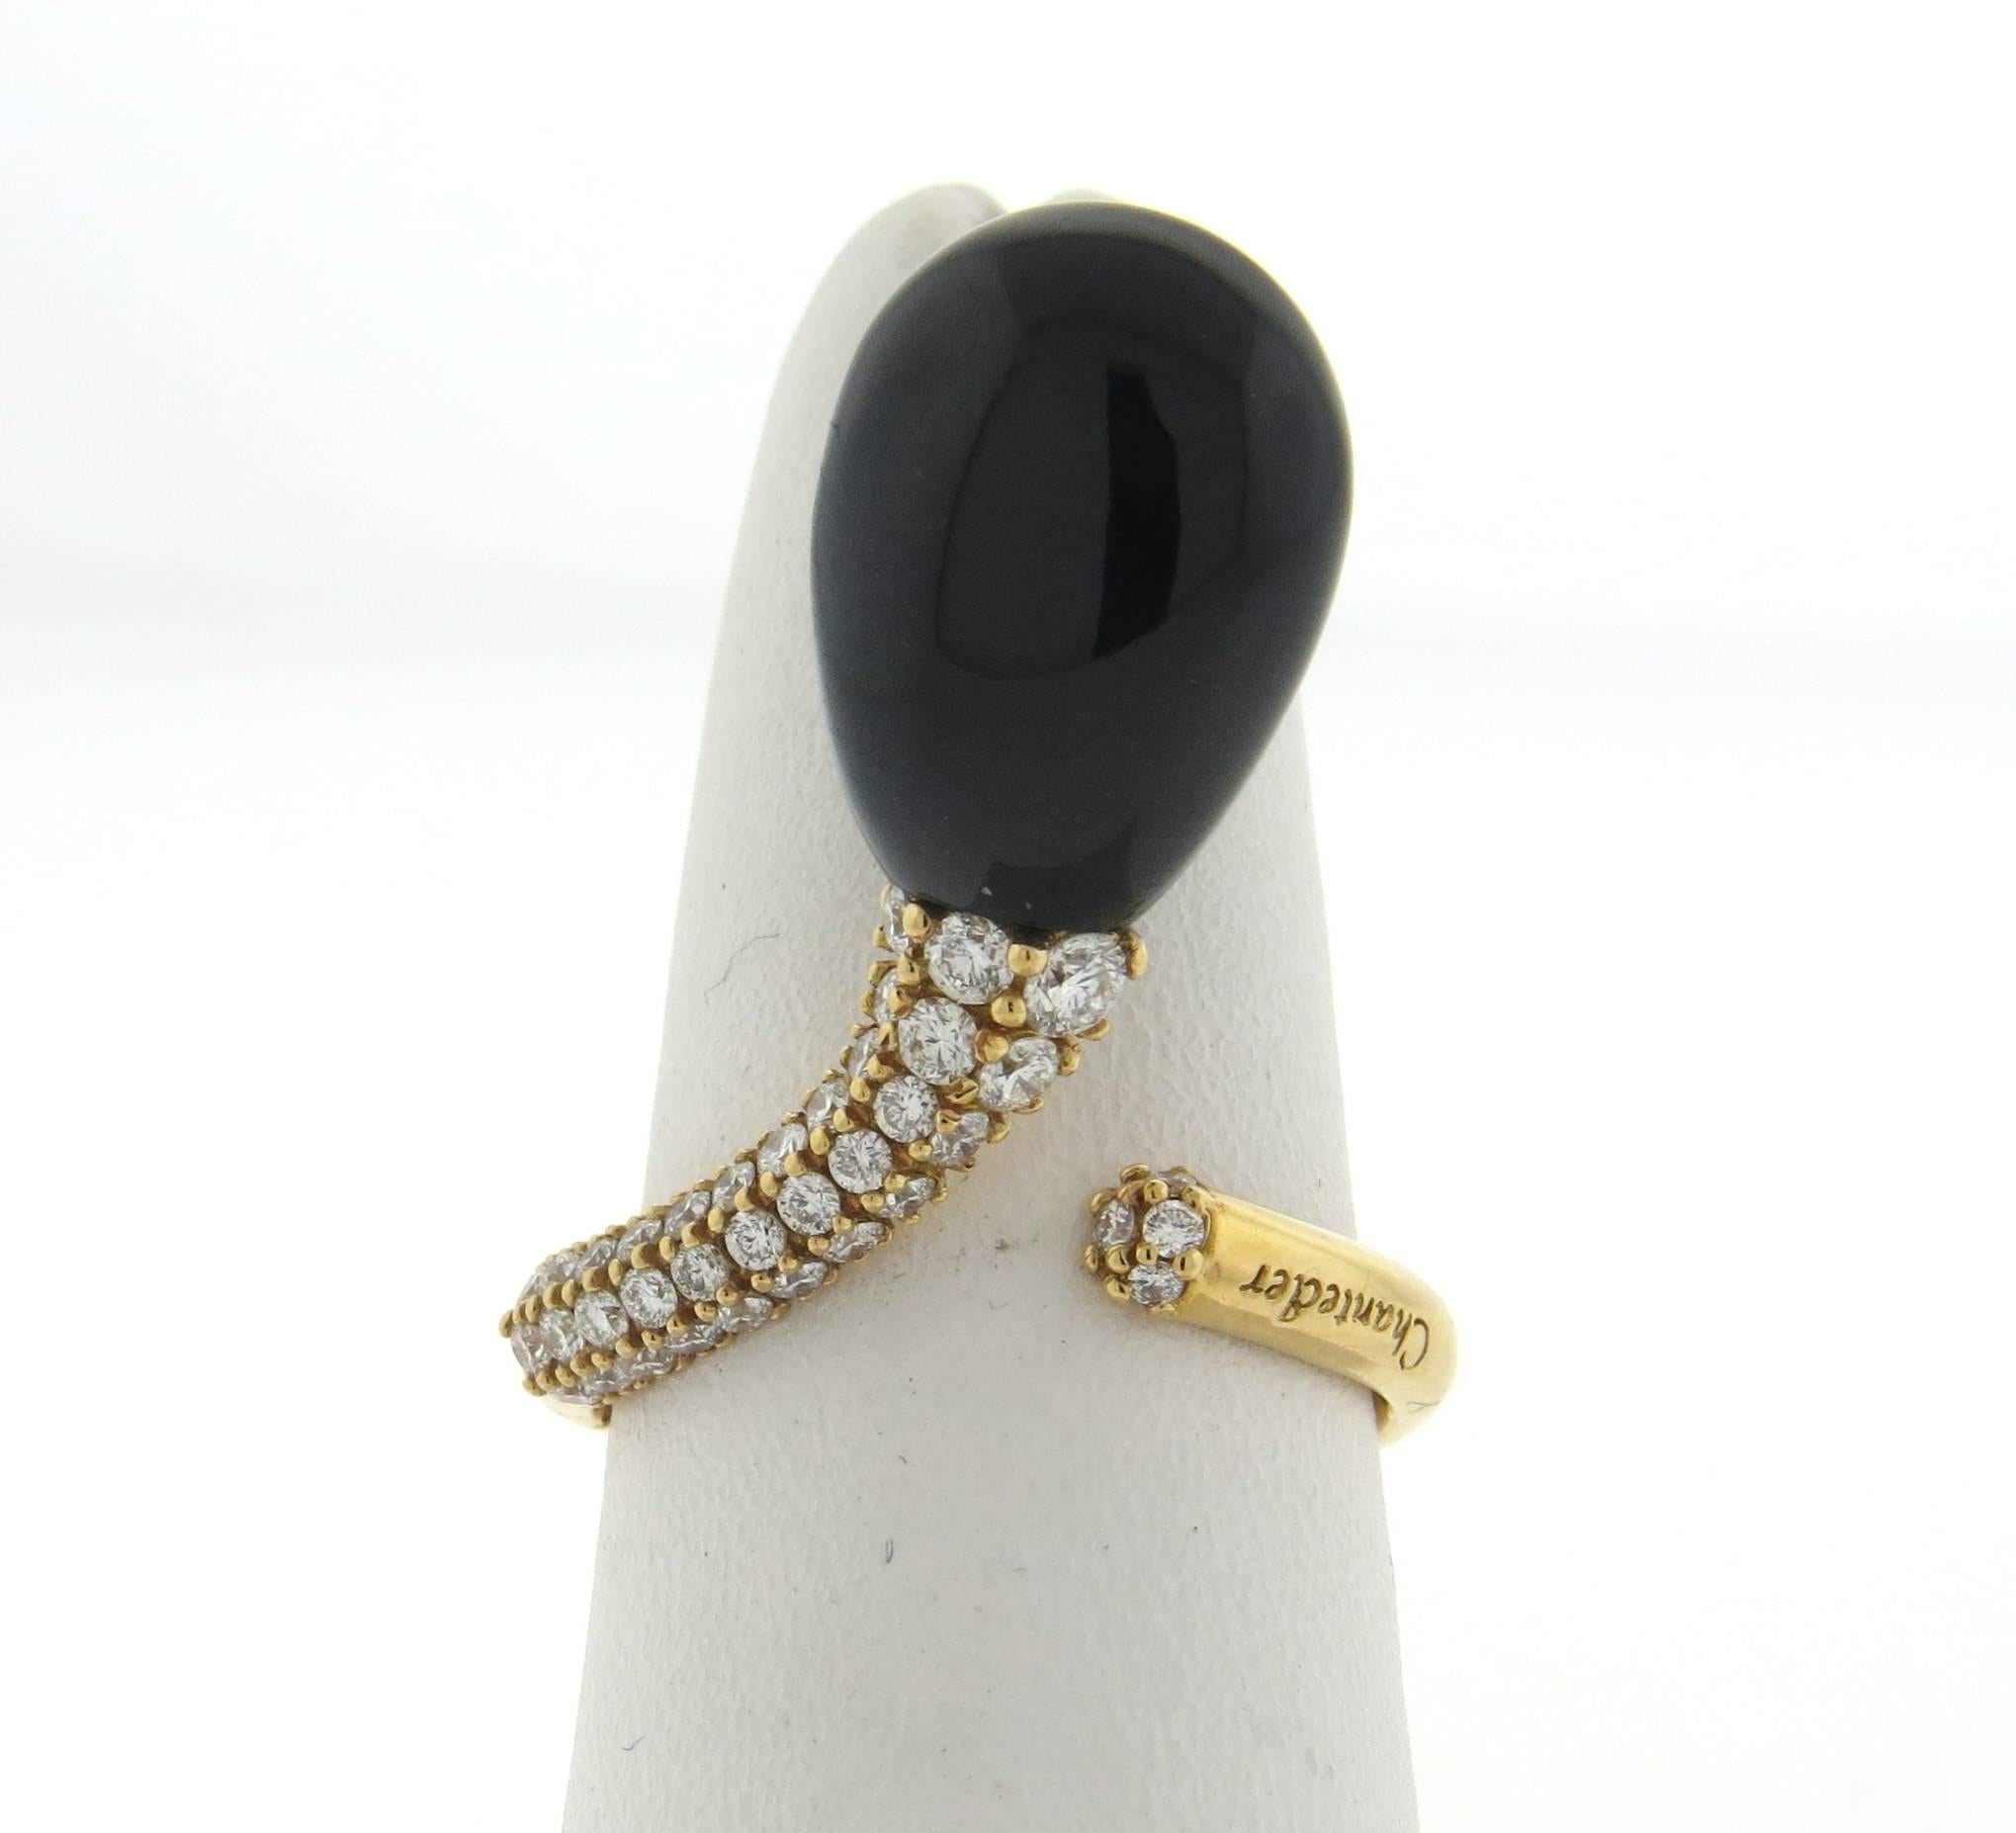 An 18k rose gold ring, crafted by Chantecler, decorated with 11mm x 15mm black onyx and approximately 0.45ctw in diamonds. Ring size is slightly flexible - approx. 6 1/2. Marked: Chantecler, M, 750. Weight of the piece - 5.6 grams
Retail $5500